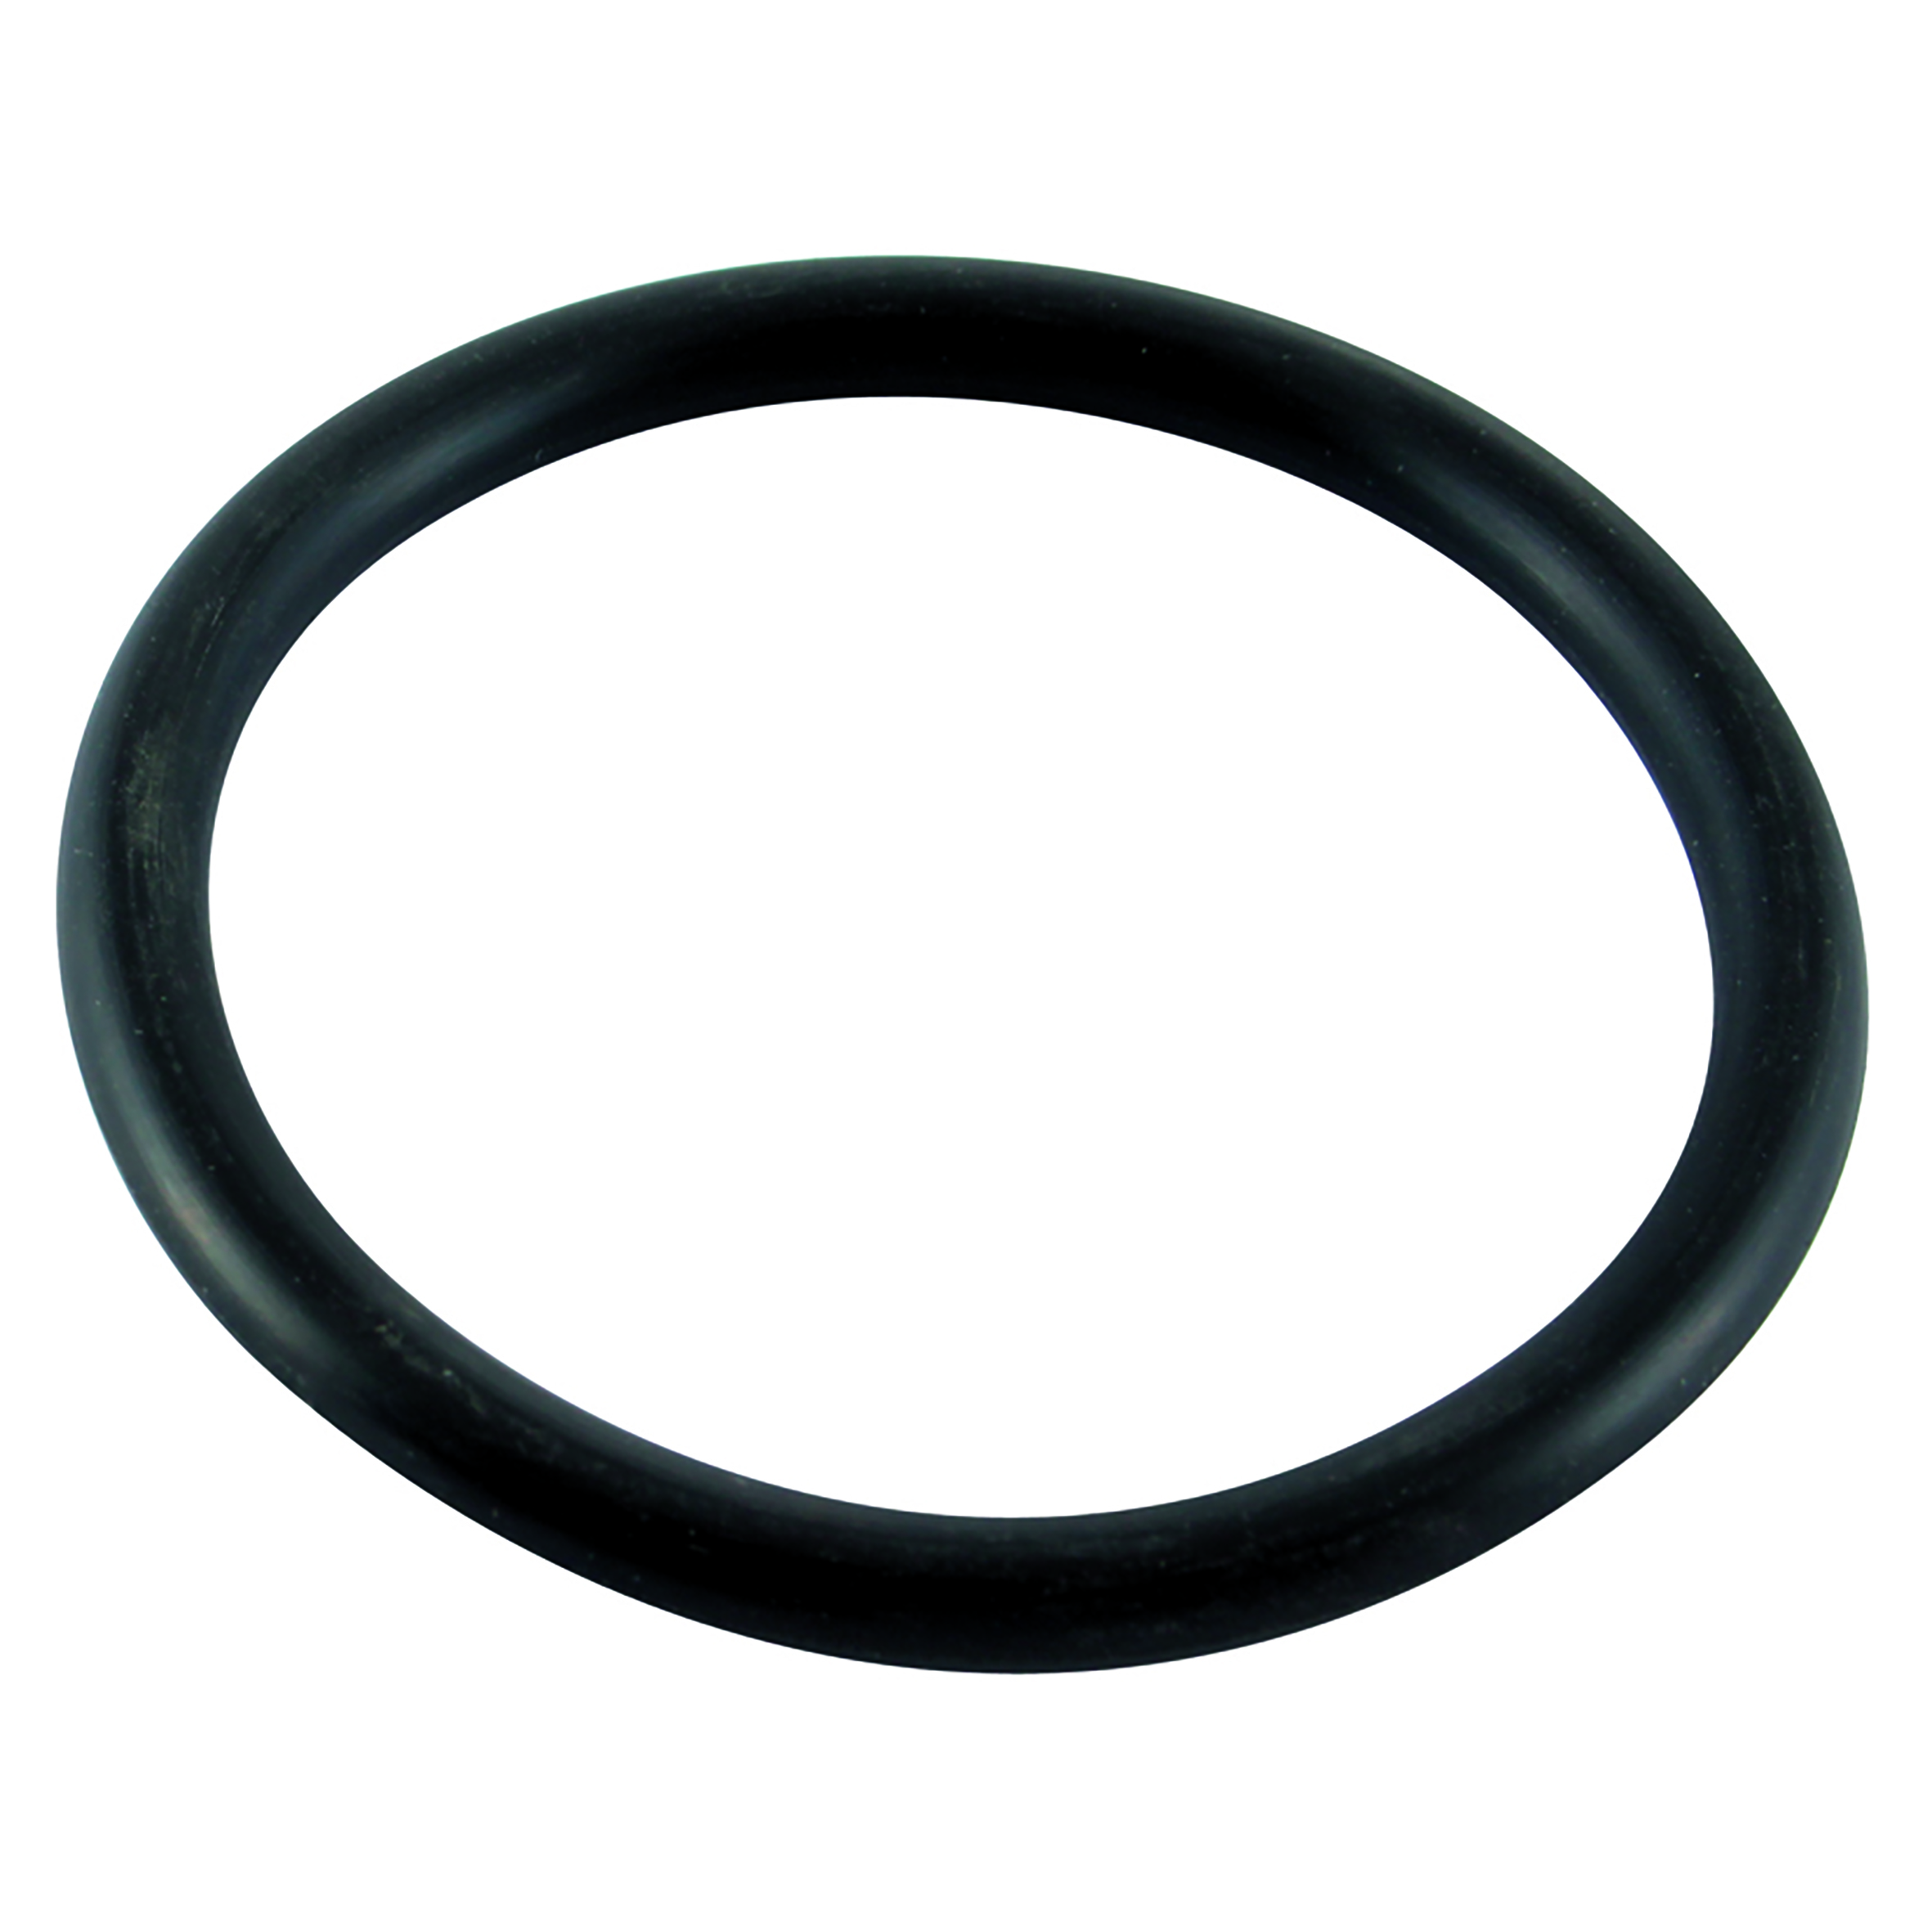 1.1/16" ID Imperial O-Ring